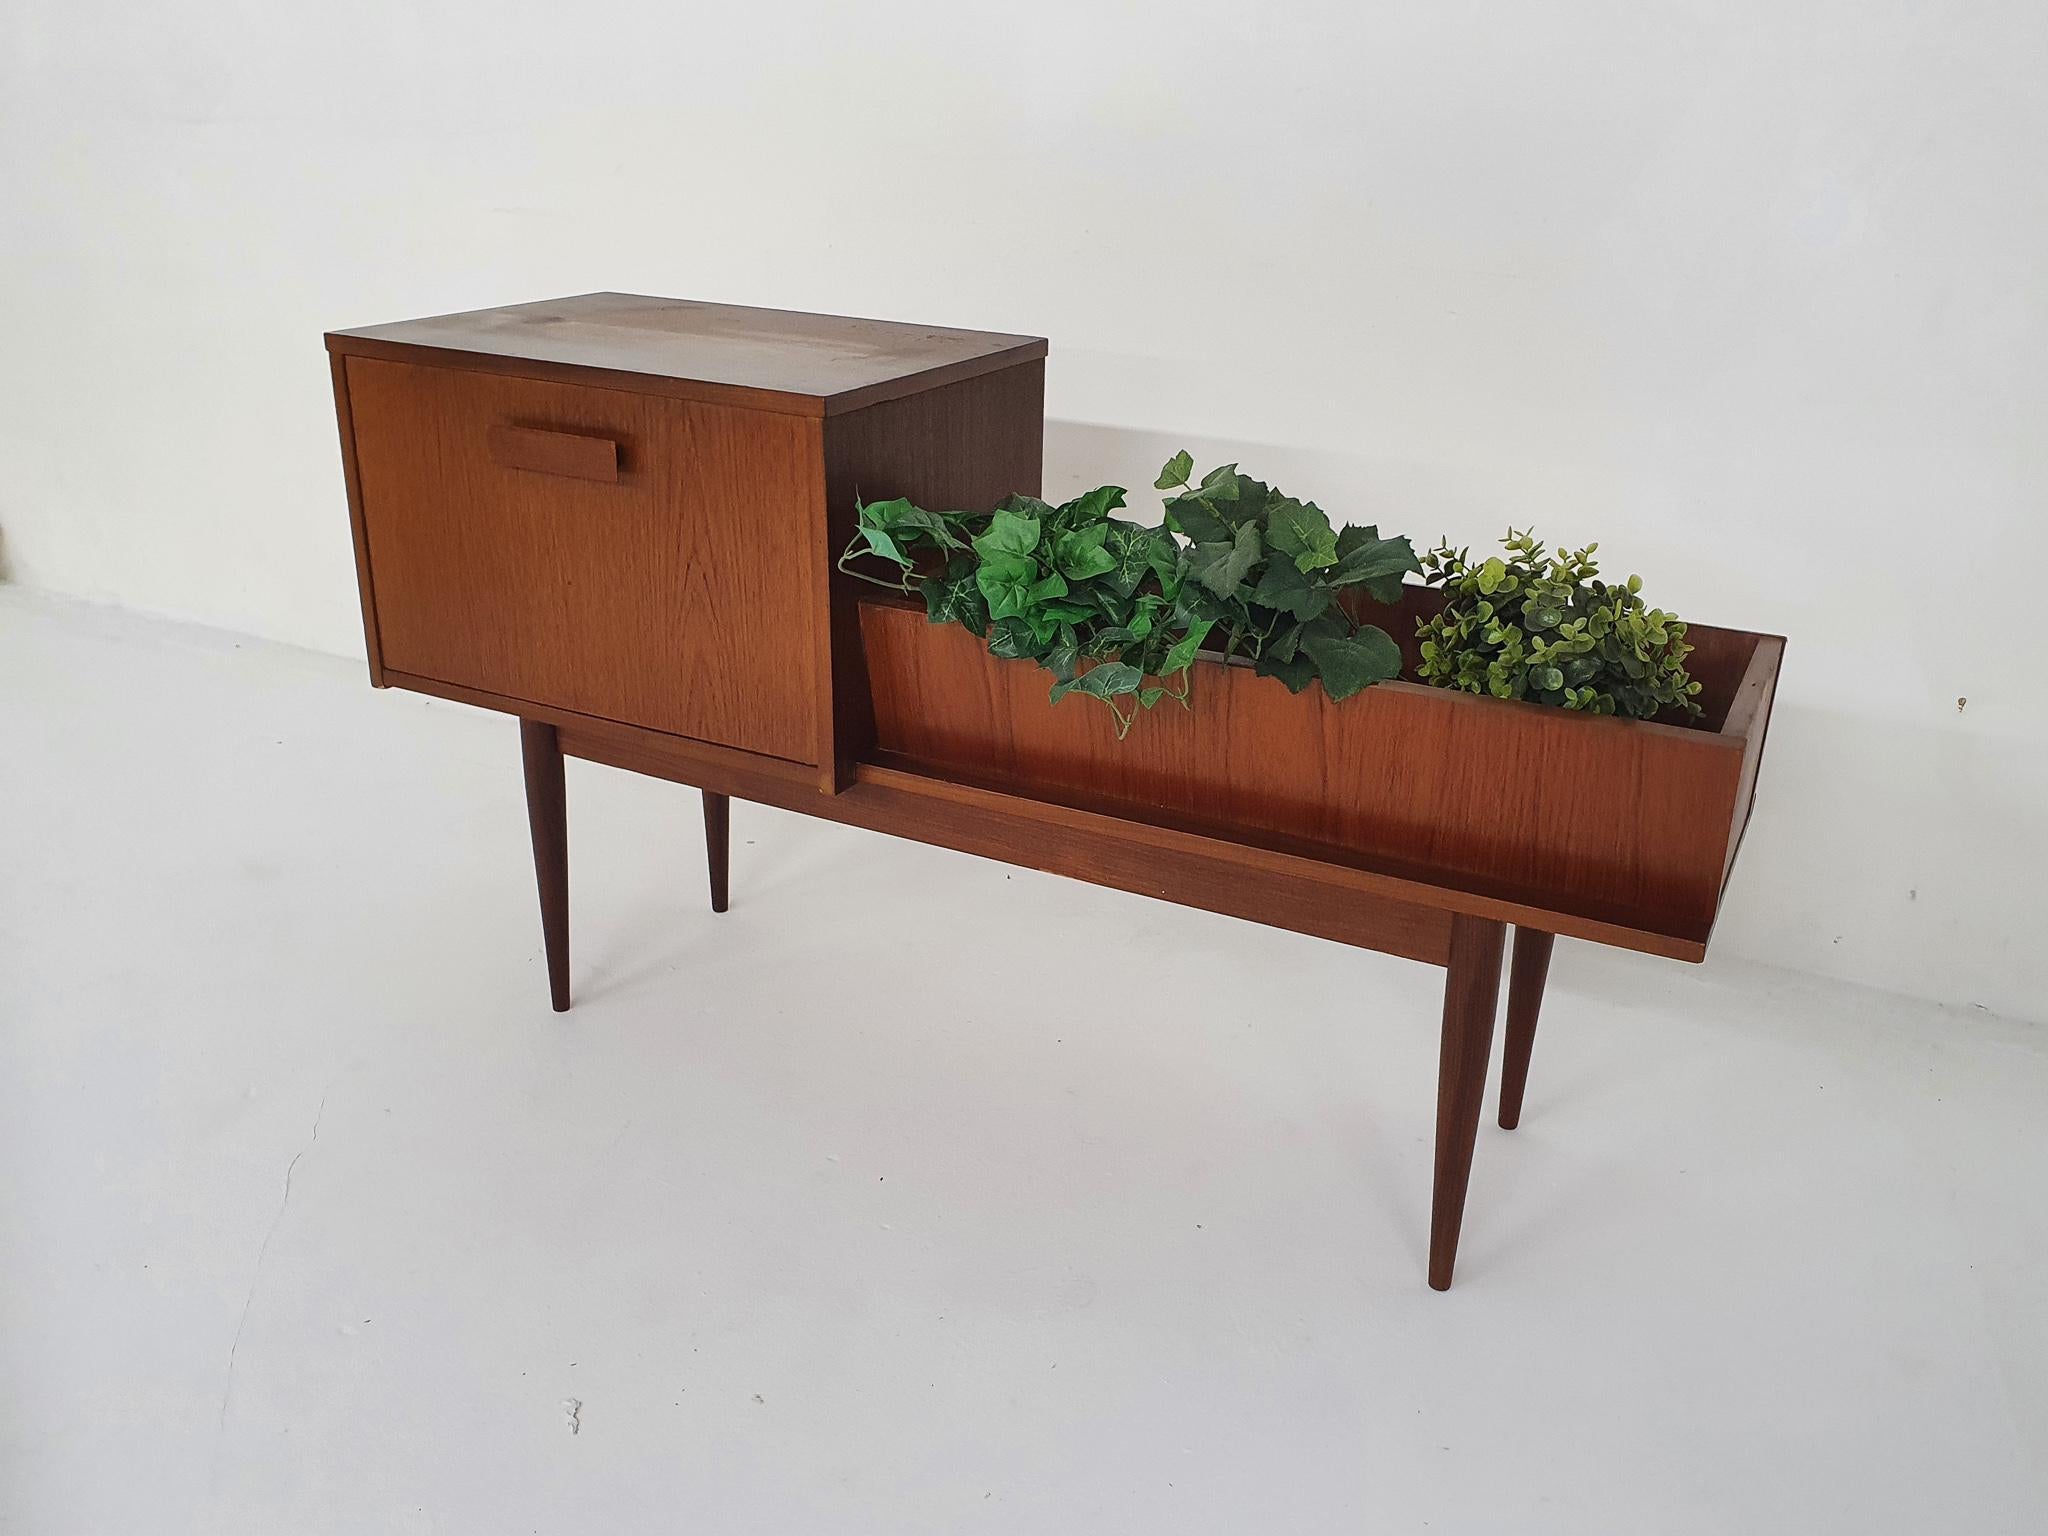 Dutch Mid-century cabinet with plant stand, The Netherlands 1950's